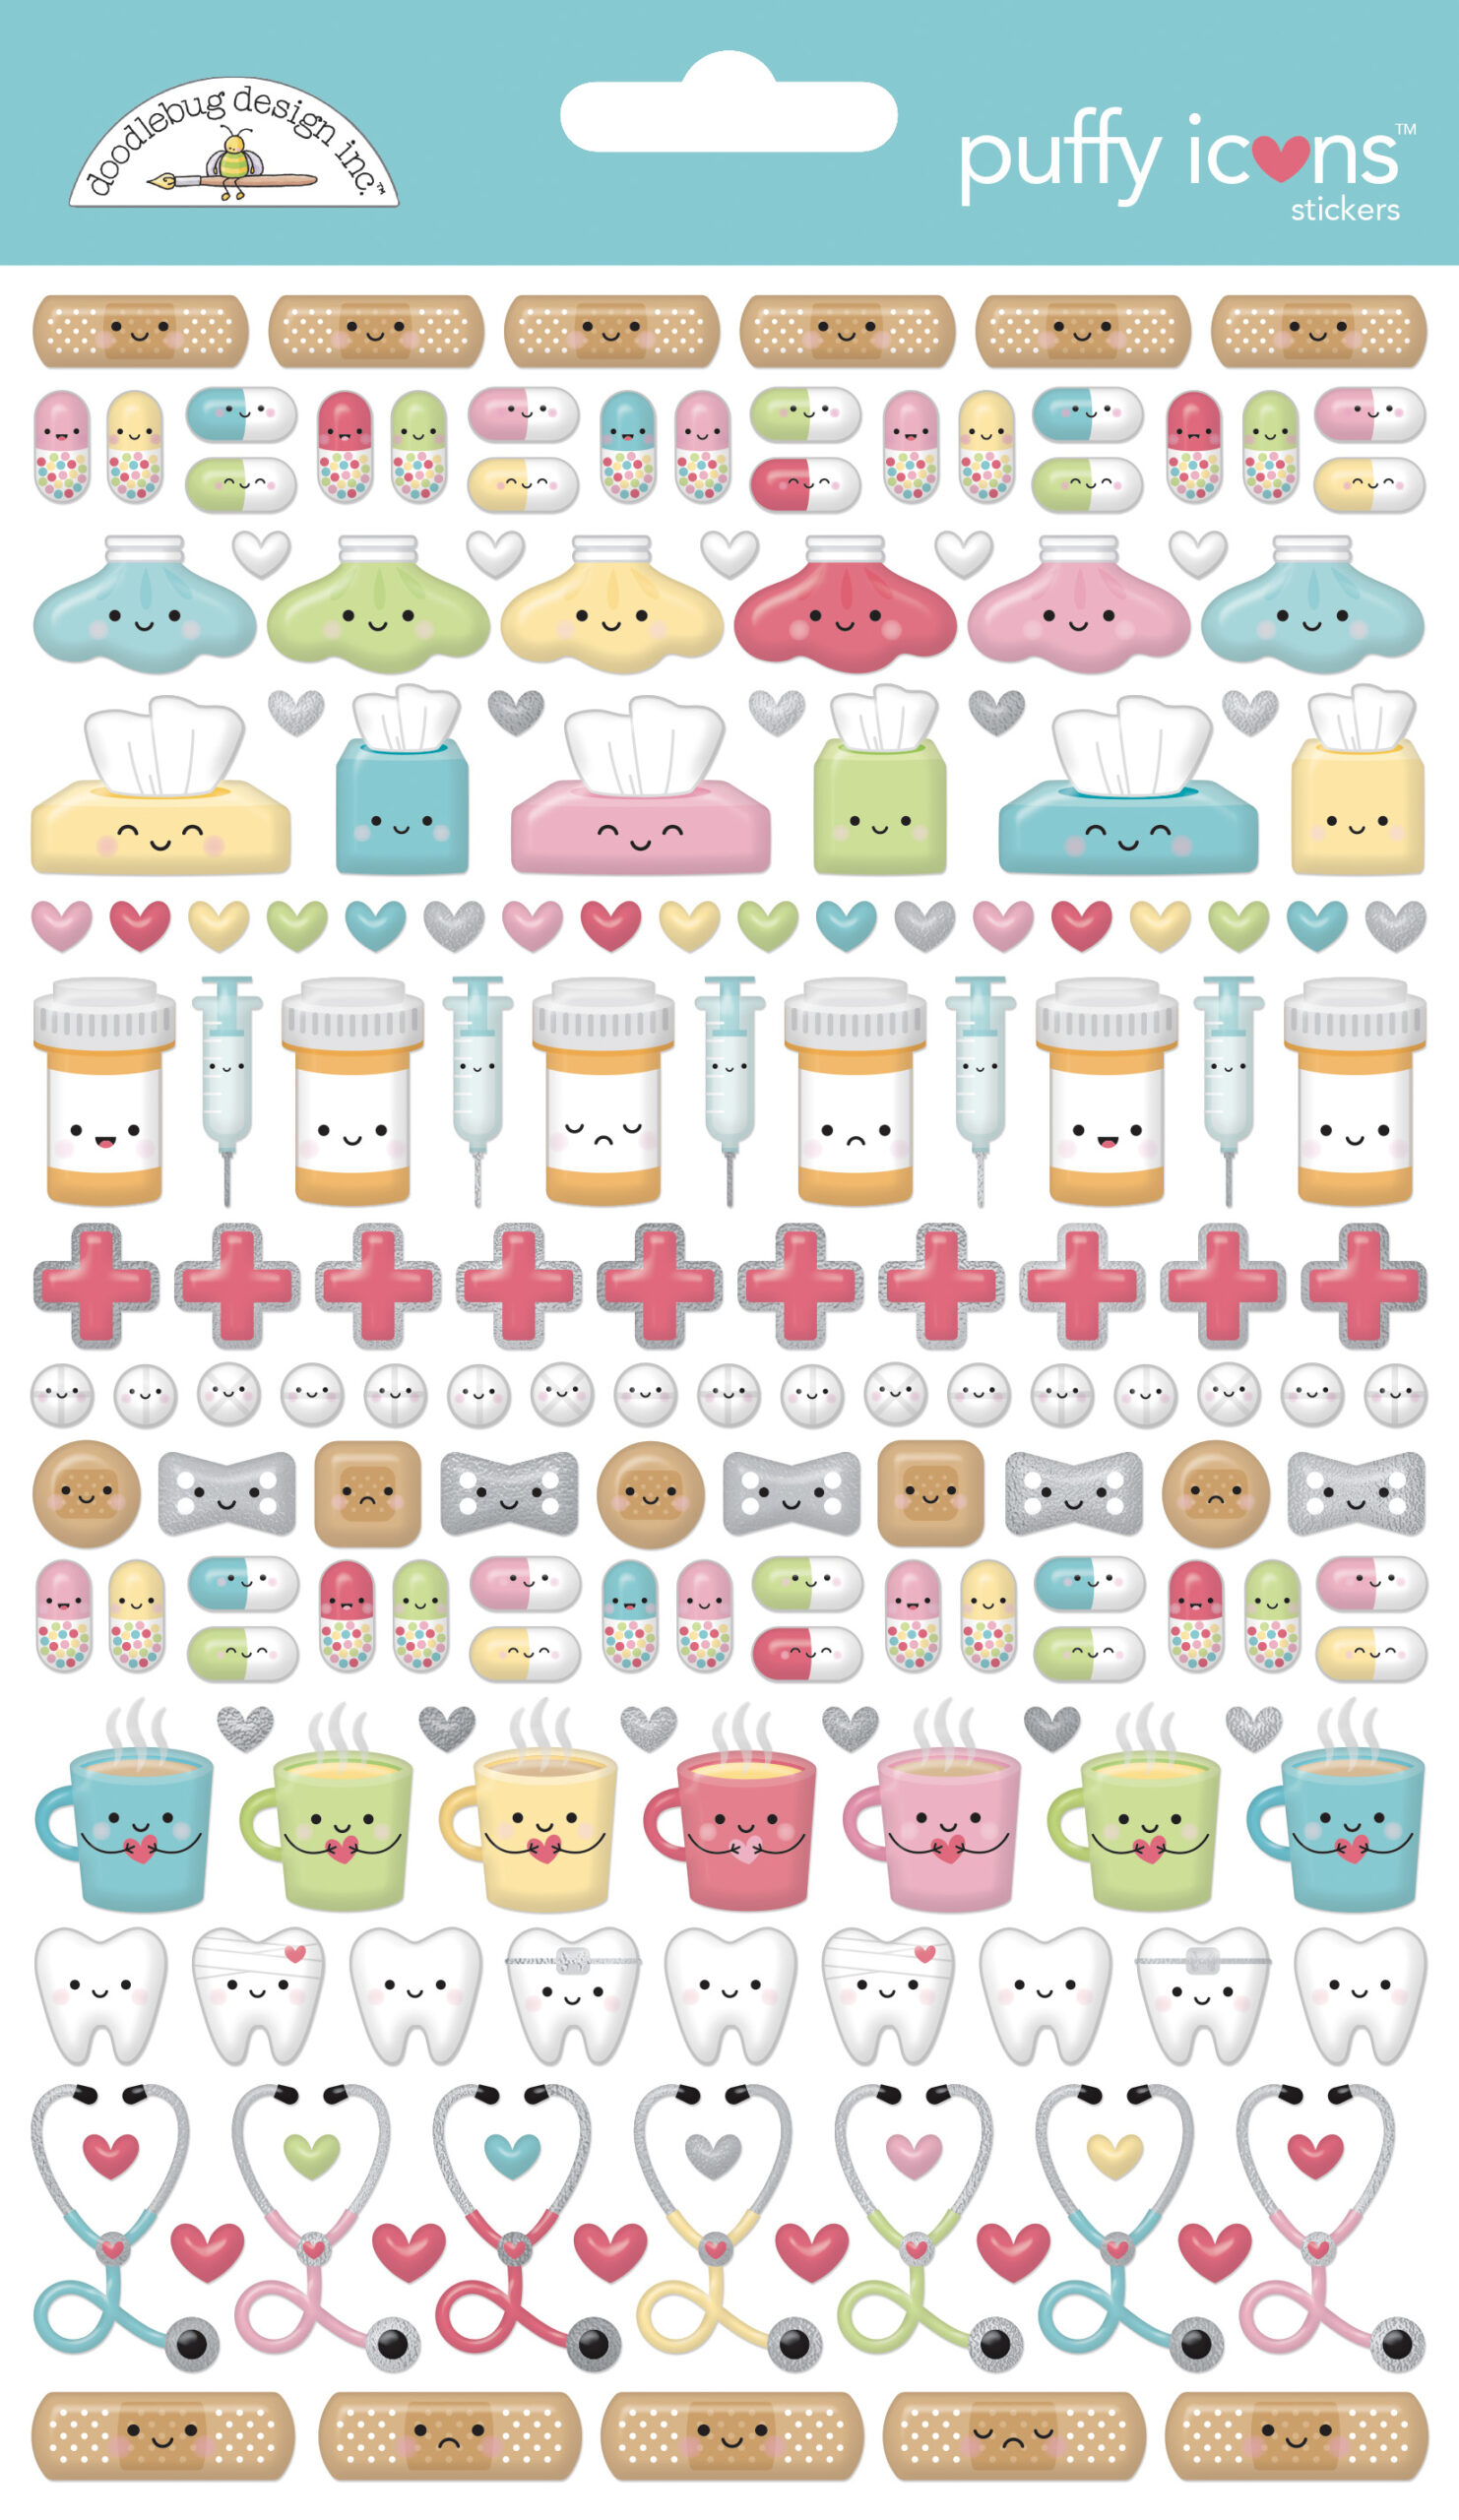 Doodlebug Happy Healing Puffy Icons Stickers